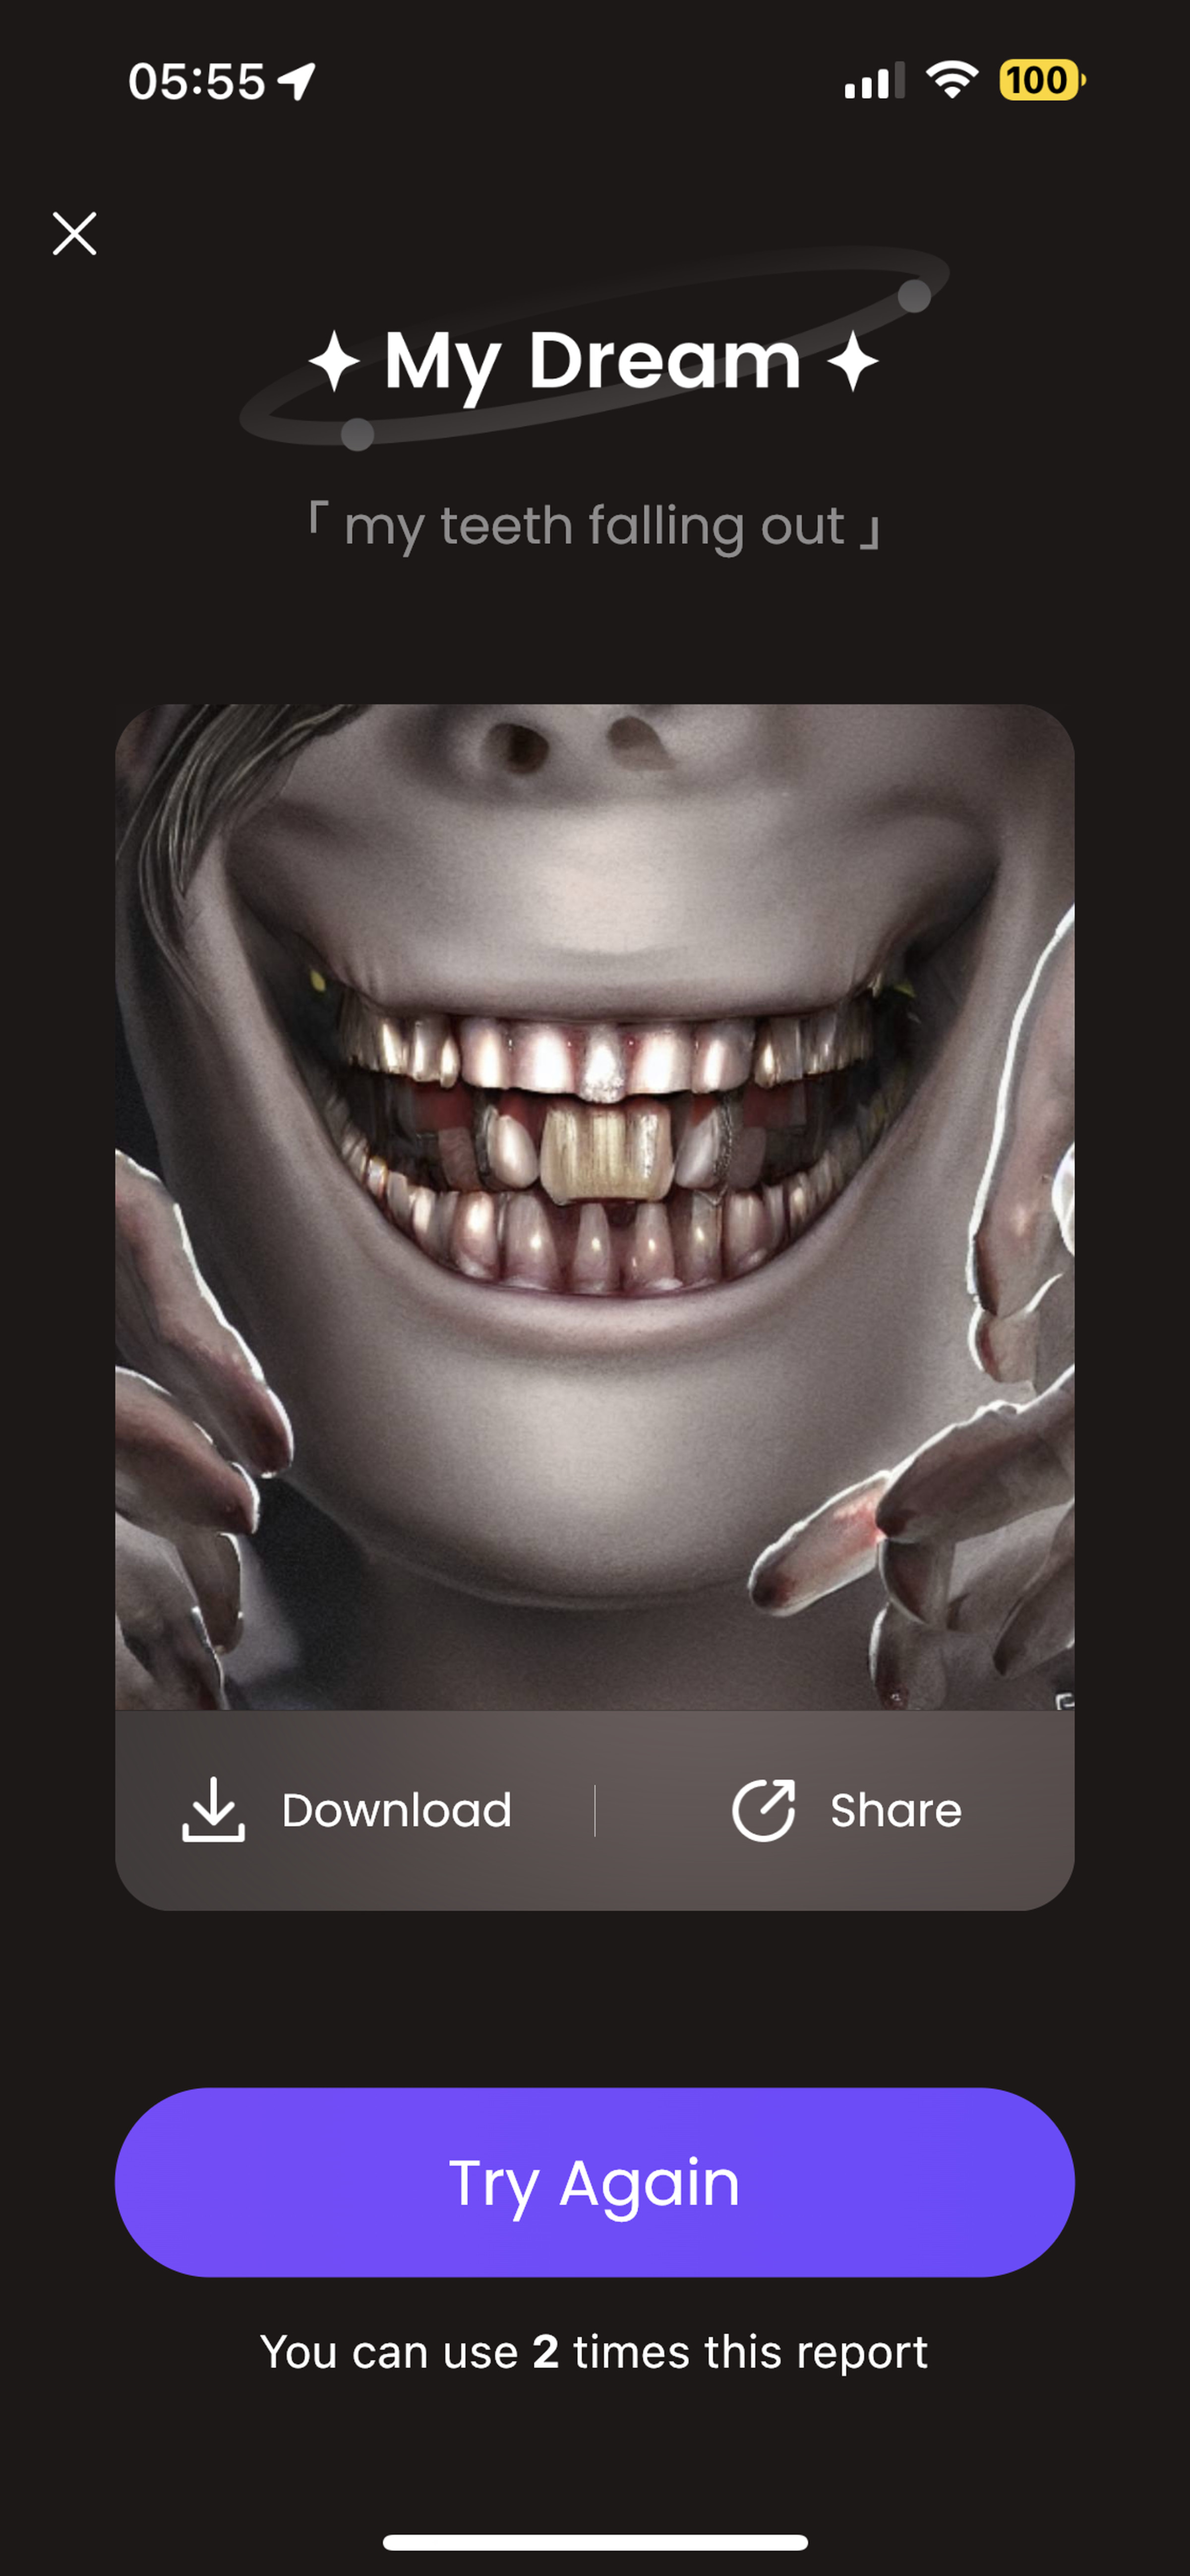 A picture of a creepy face with two rows of teeth created in response to the prompt “my teeth falling out.”